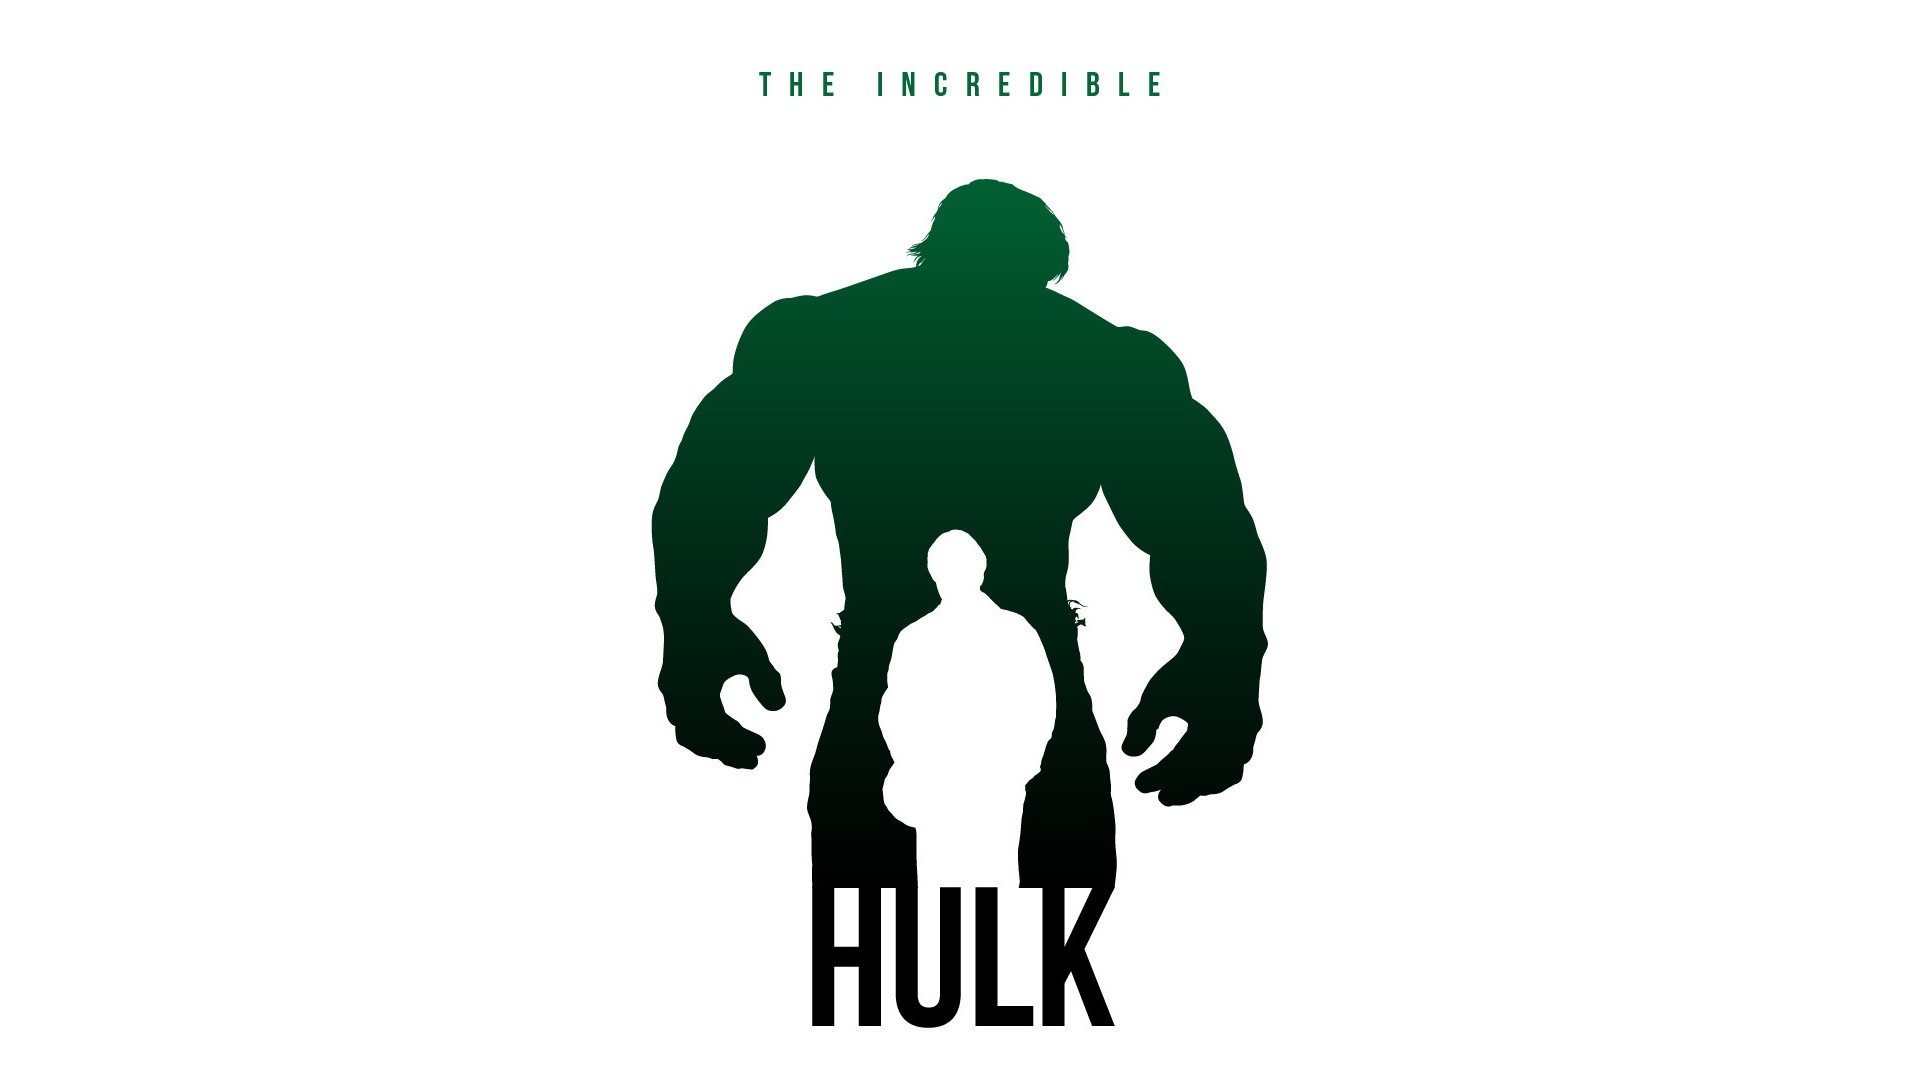 1920x1080 Excellent Wallpapers: Incredible Hulk PC Background Wallpapers Â· Graceful  Full HD Images of Incredible Hulk,  ...